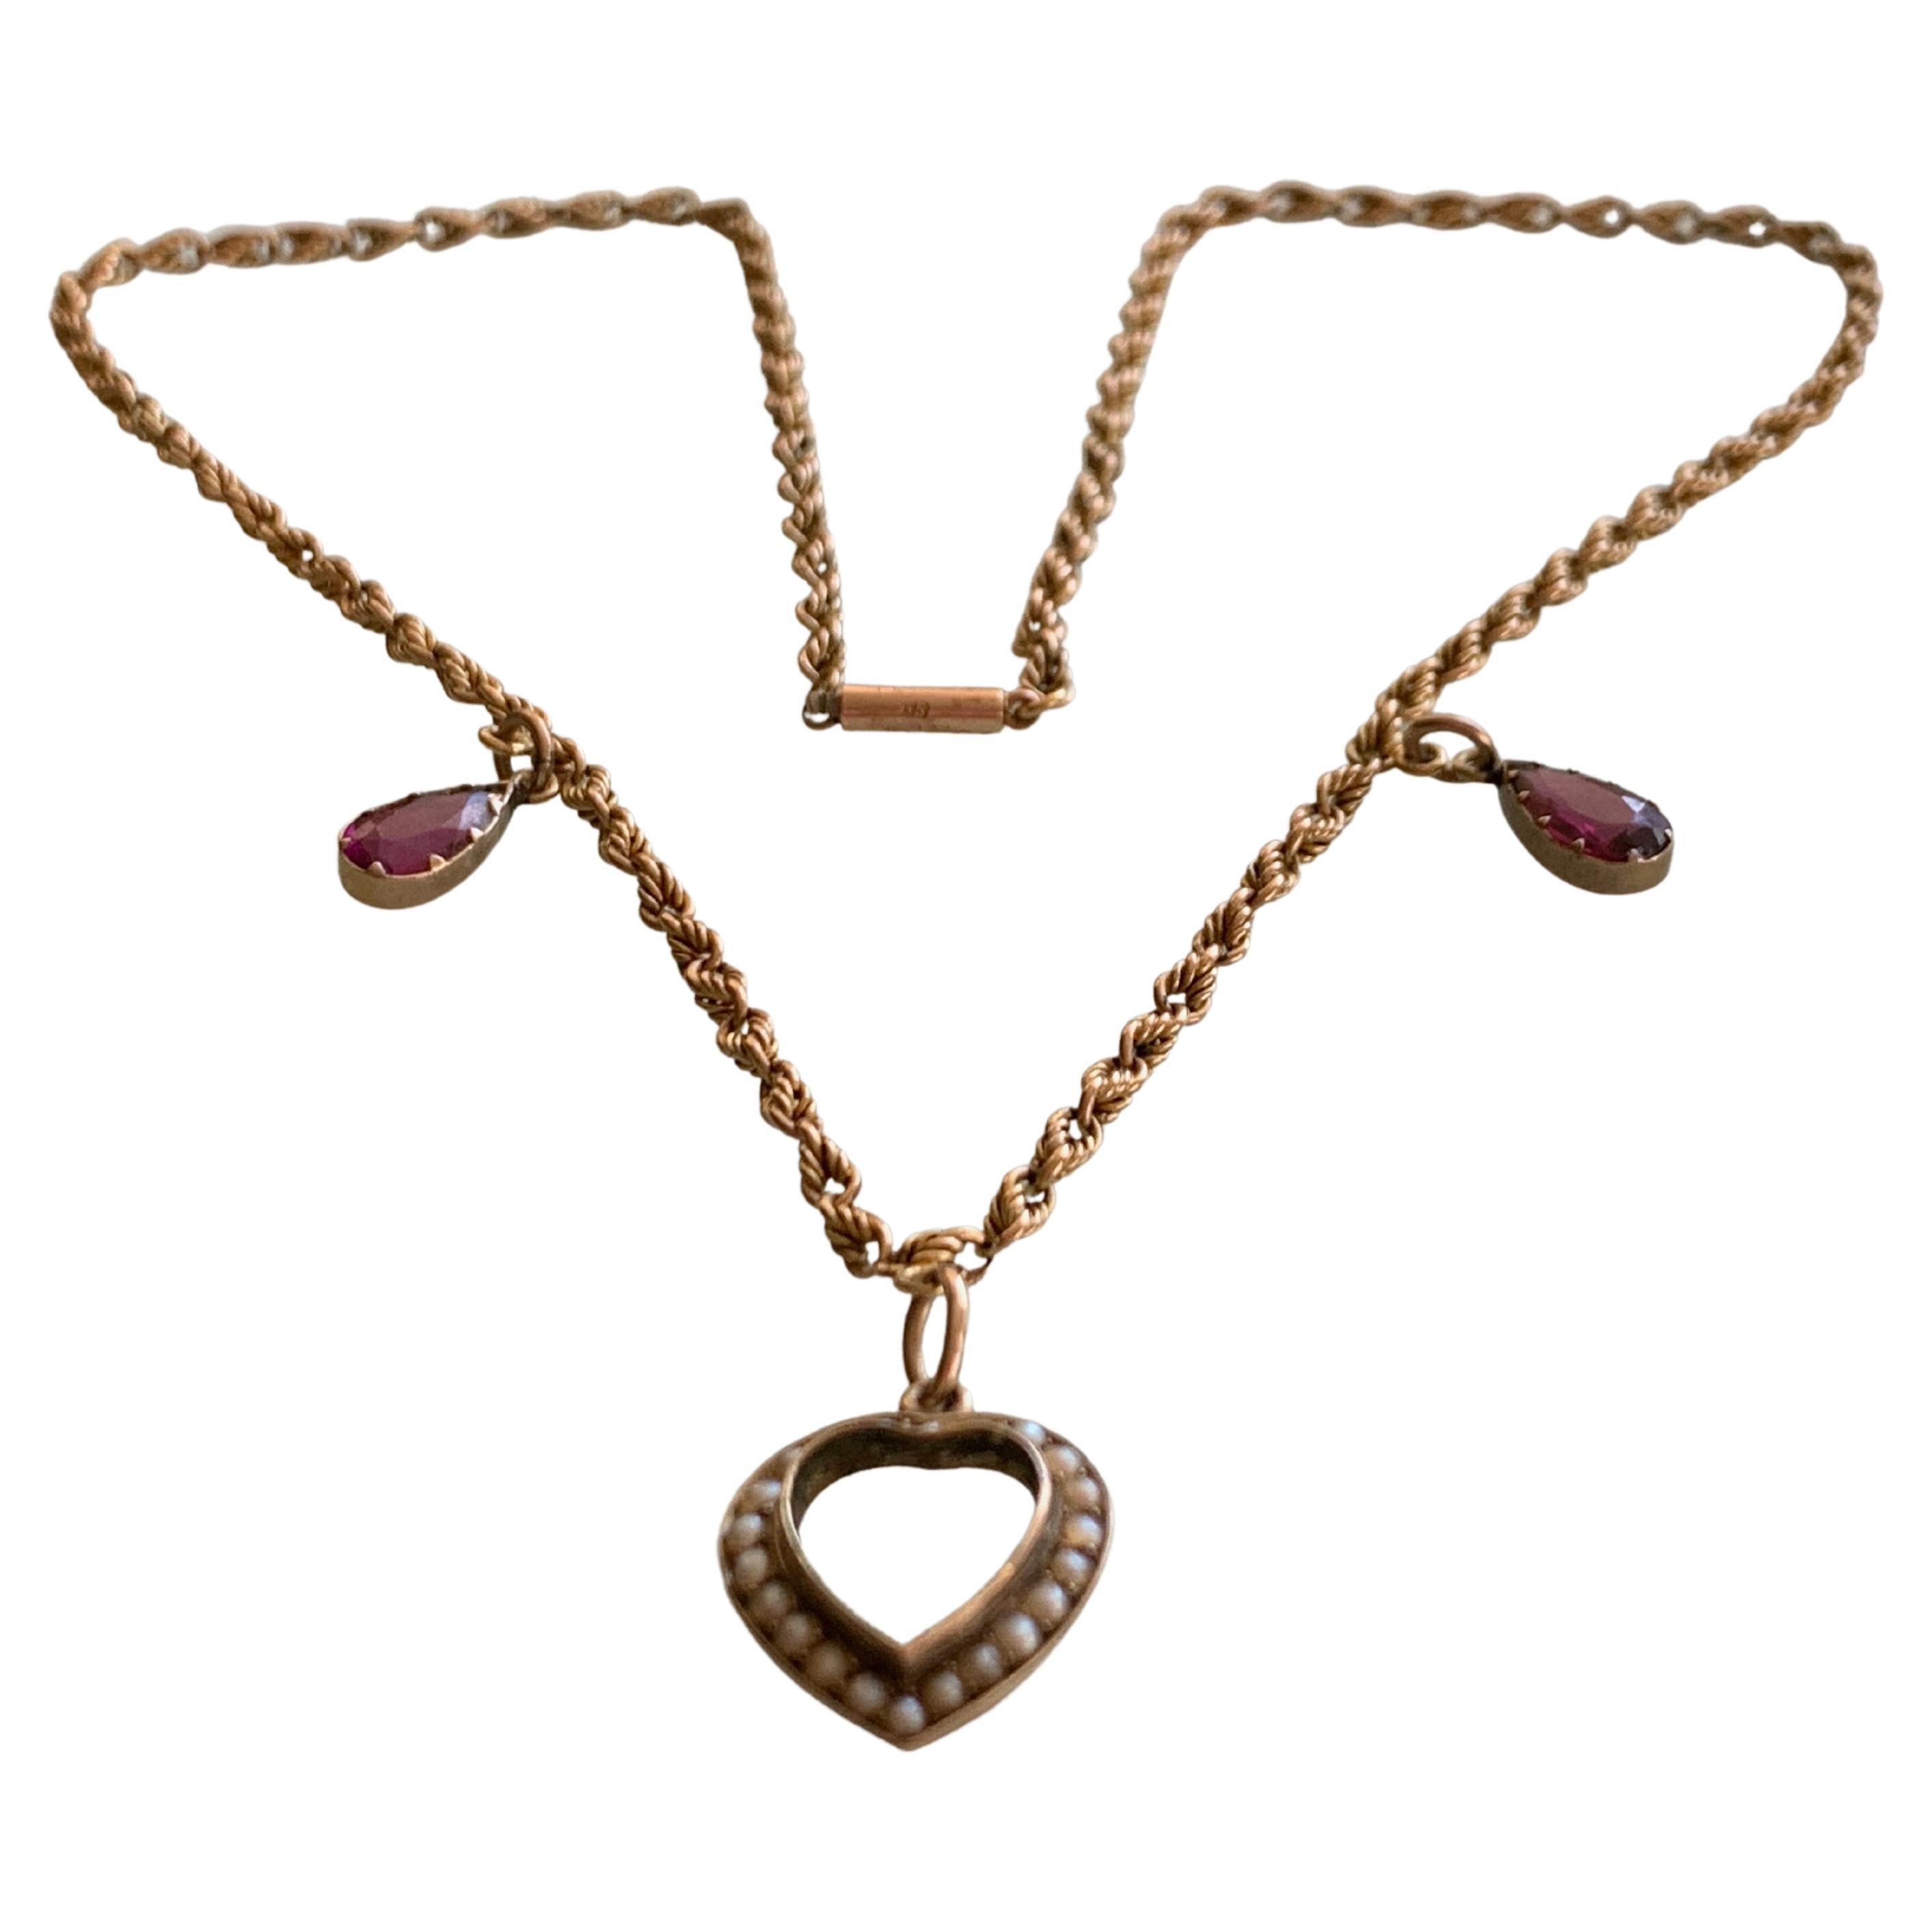 15ct Gold Antique Necklace with 9ct Heart & Amethyst Drops